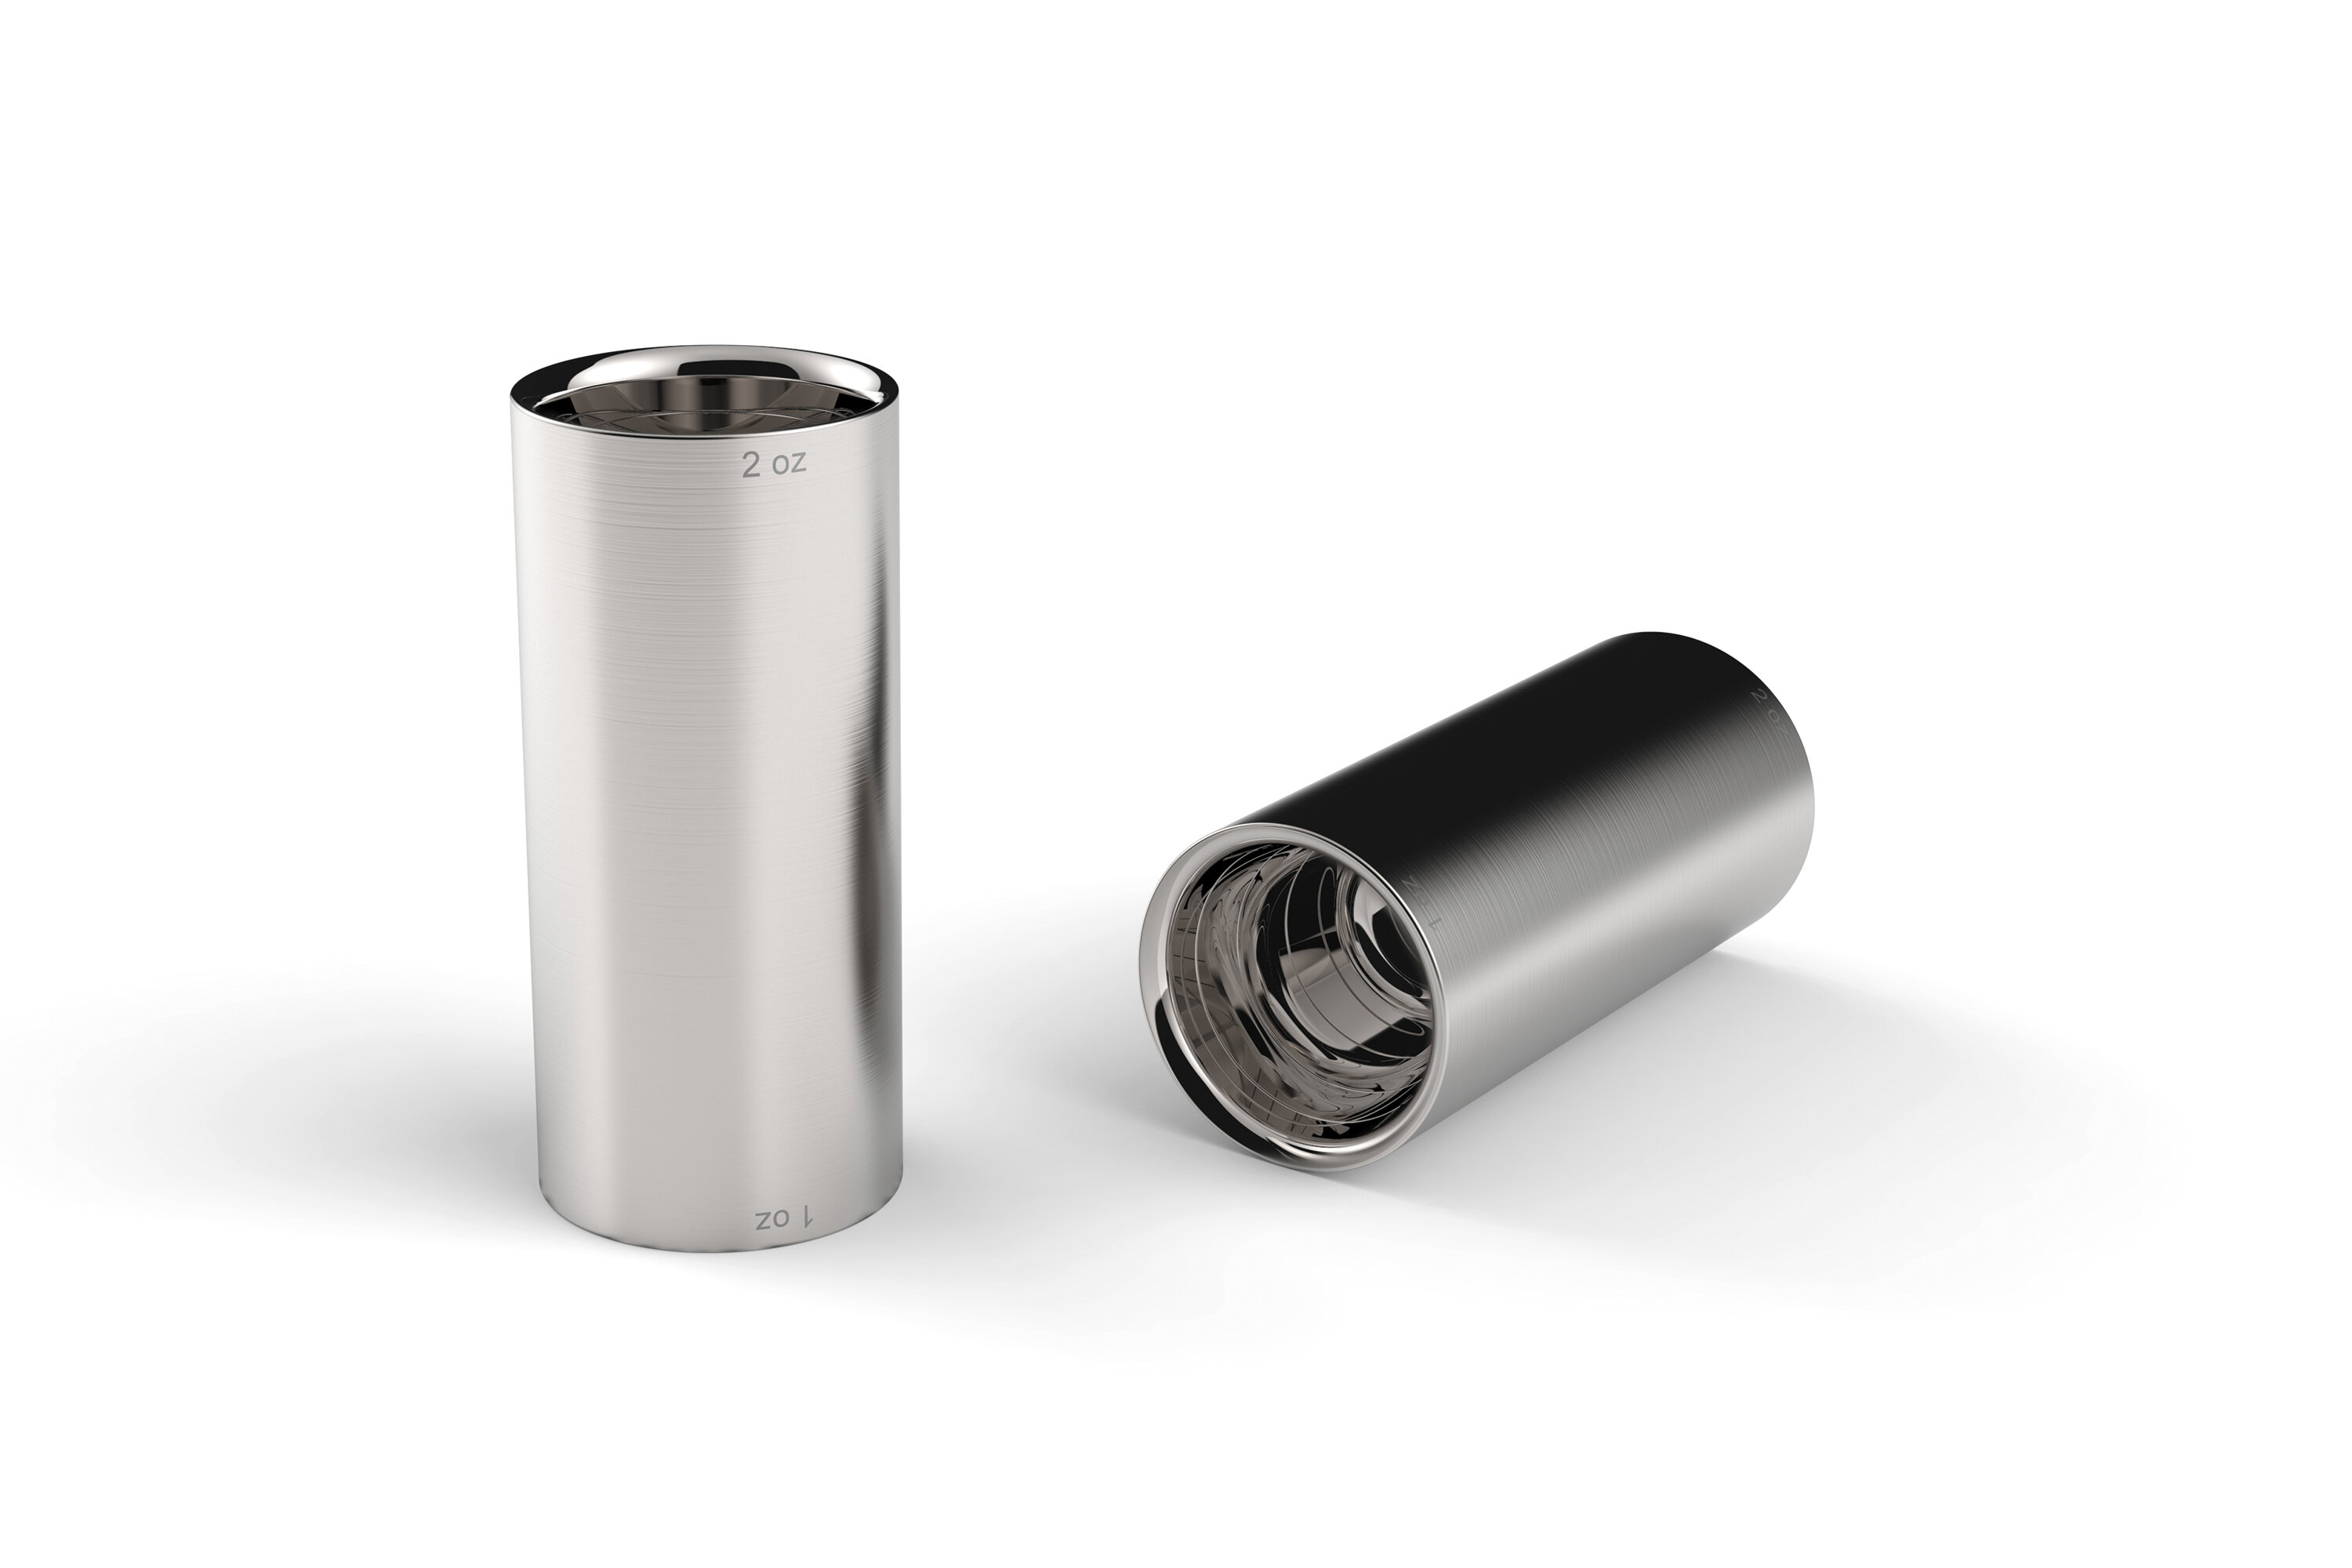 Tumbler Design Shot Cup, 304 Stainless Steel And Plastic Shot